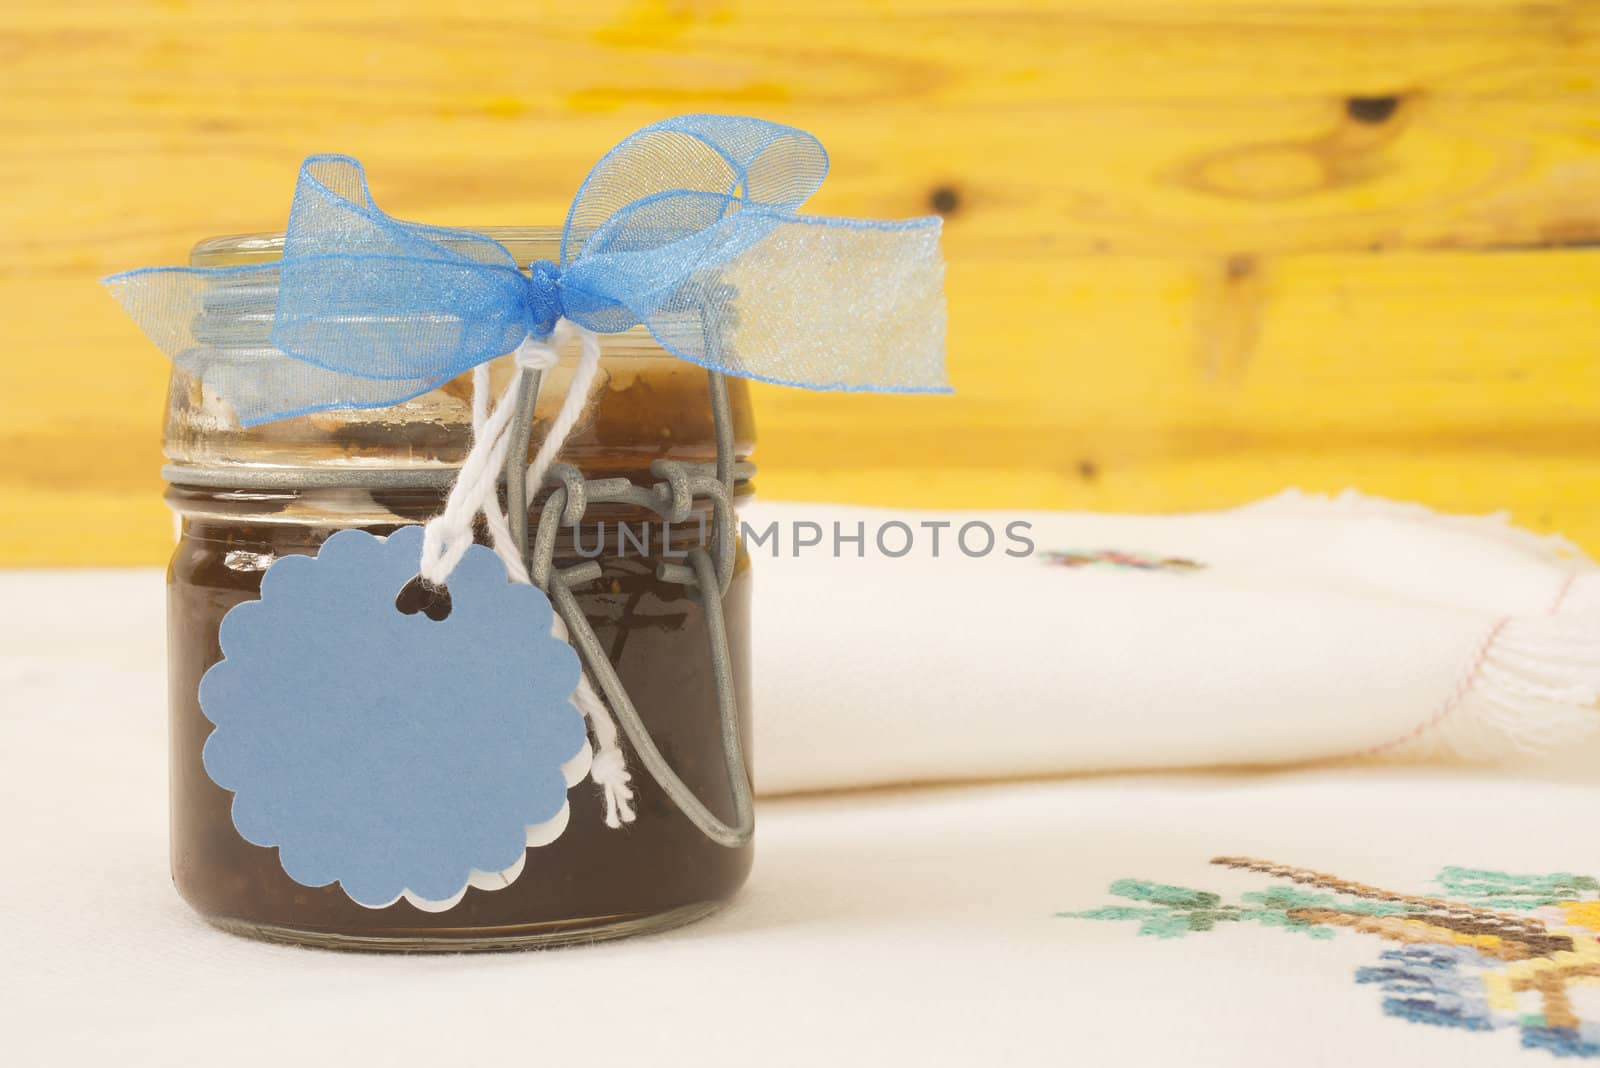 jam jar with blank label for text by Carche